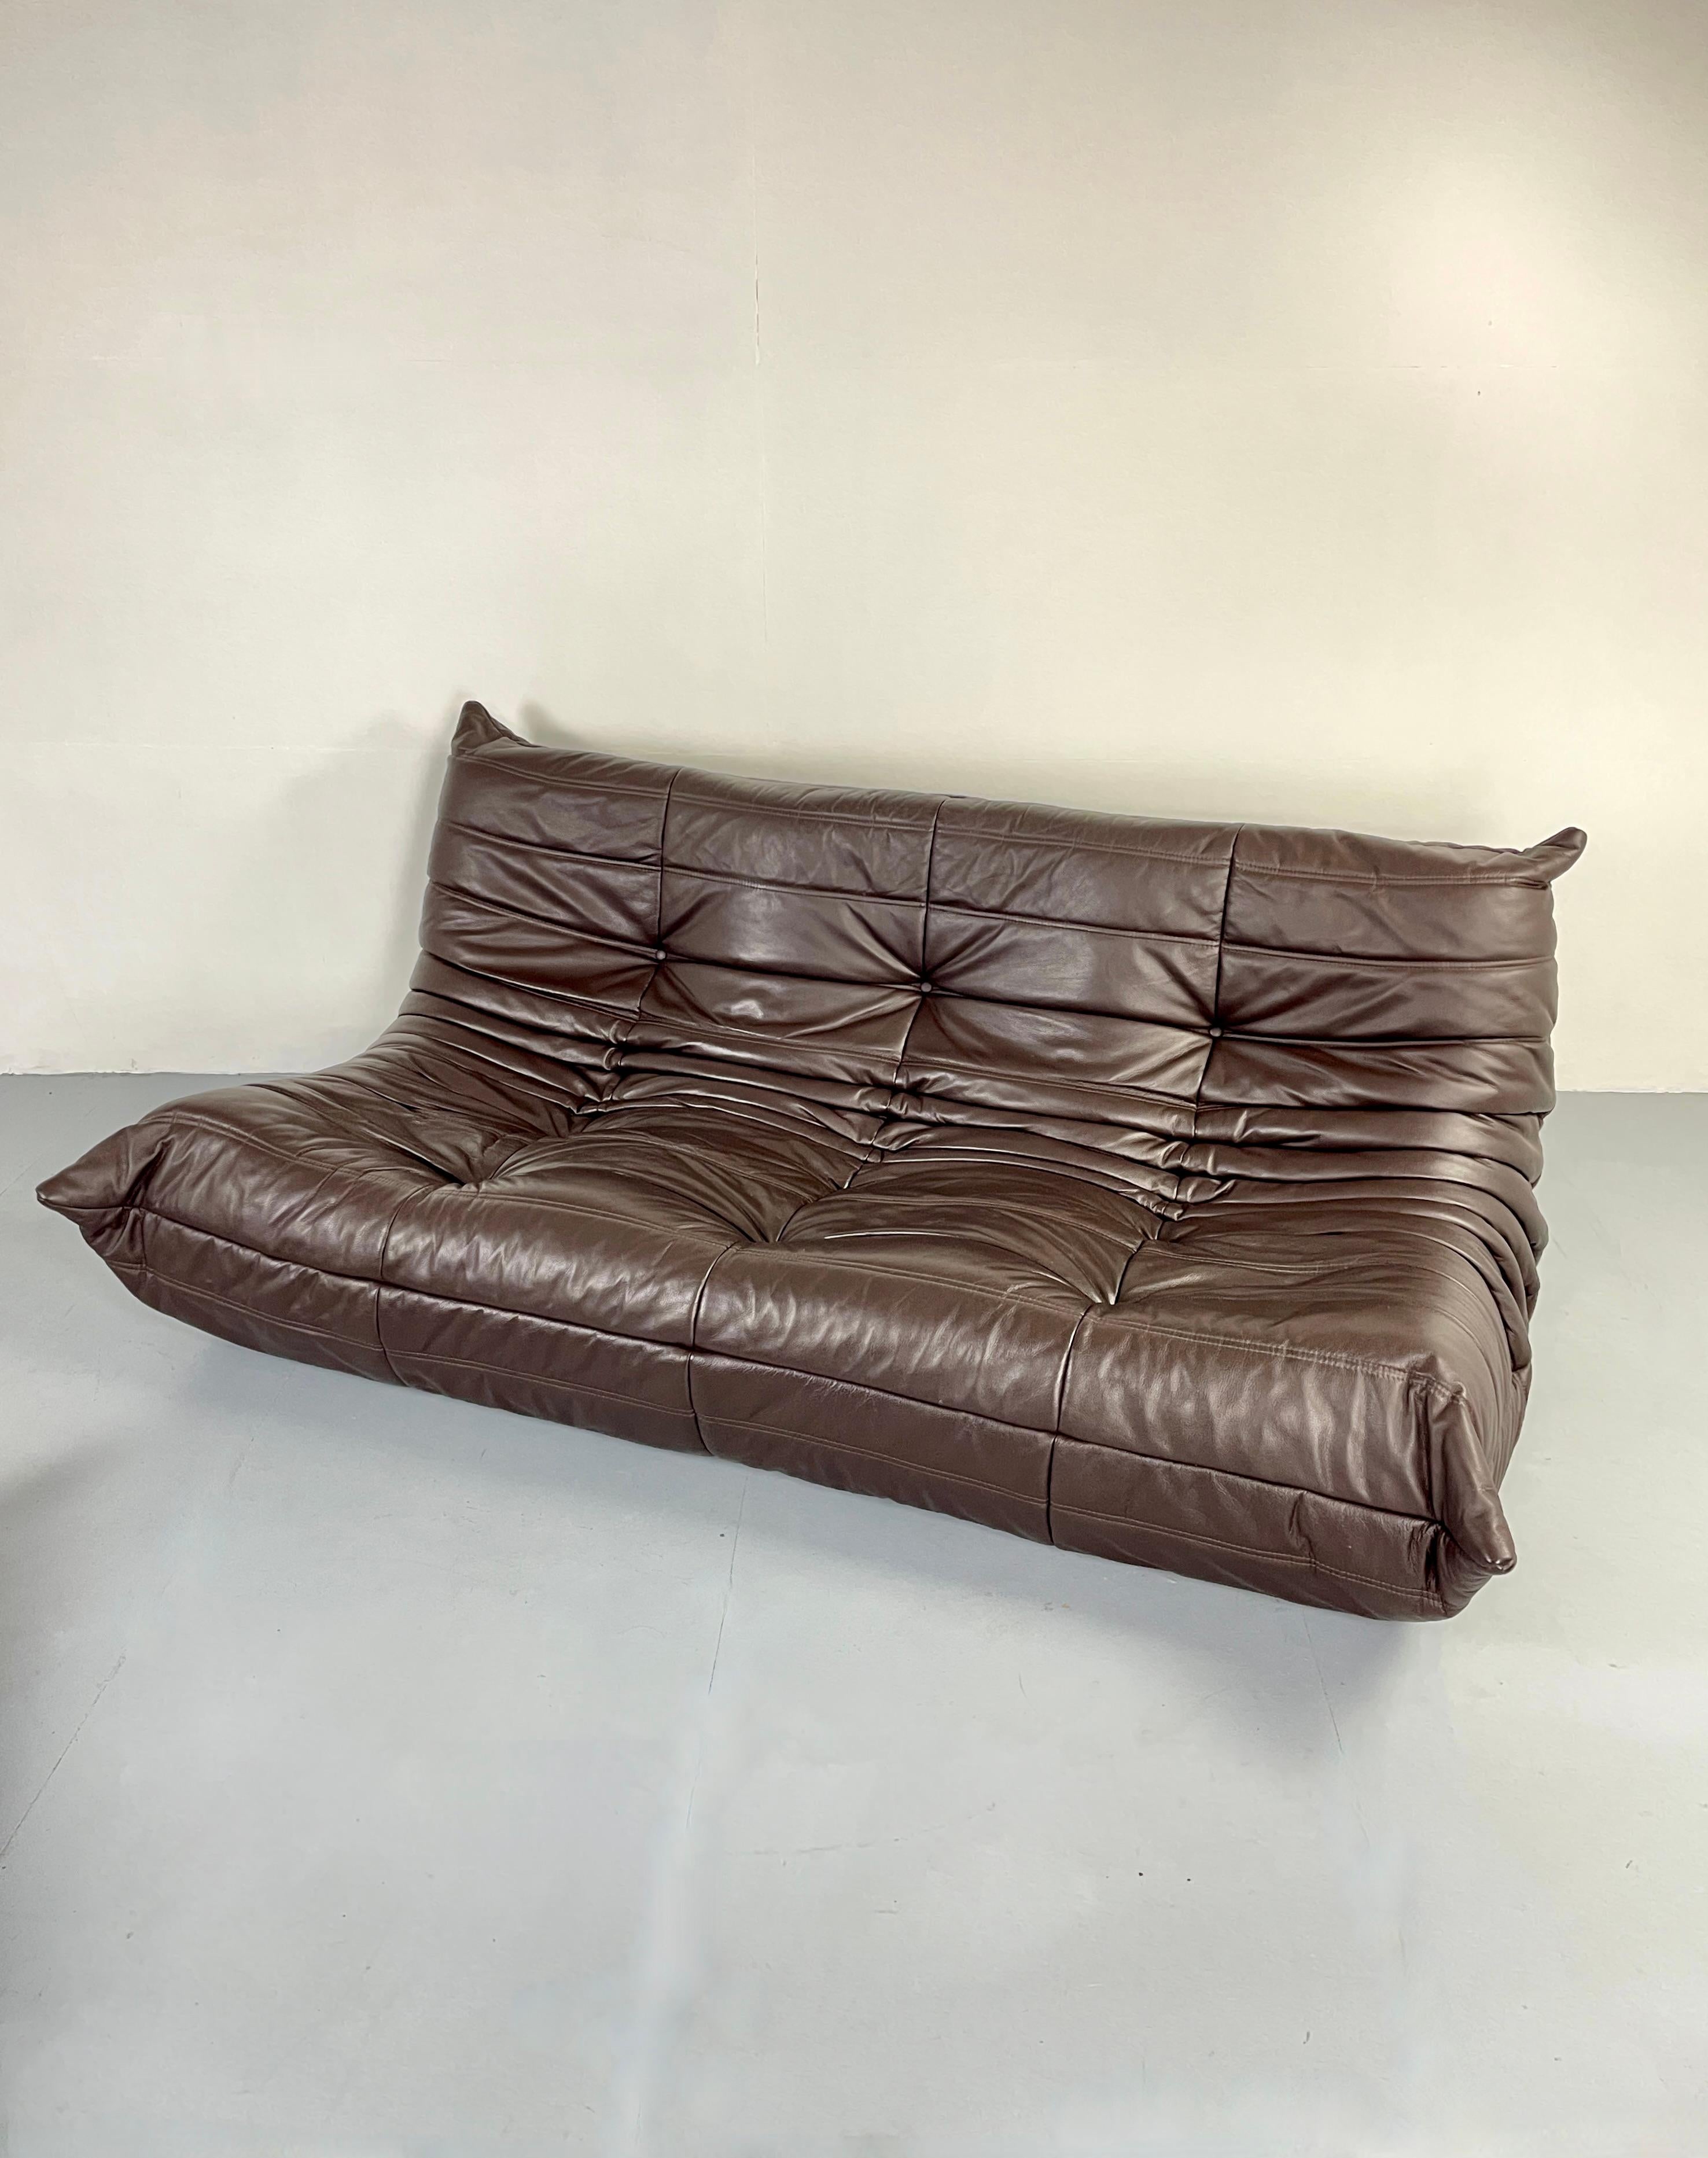 Late 20th Century Original Brown Leather Togo Sofa 5 Pieces by Michel Ducaroy for Ligne Roset